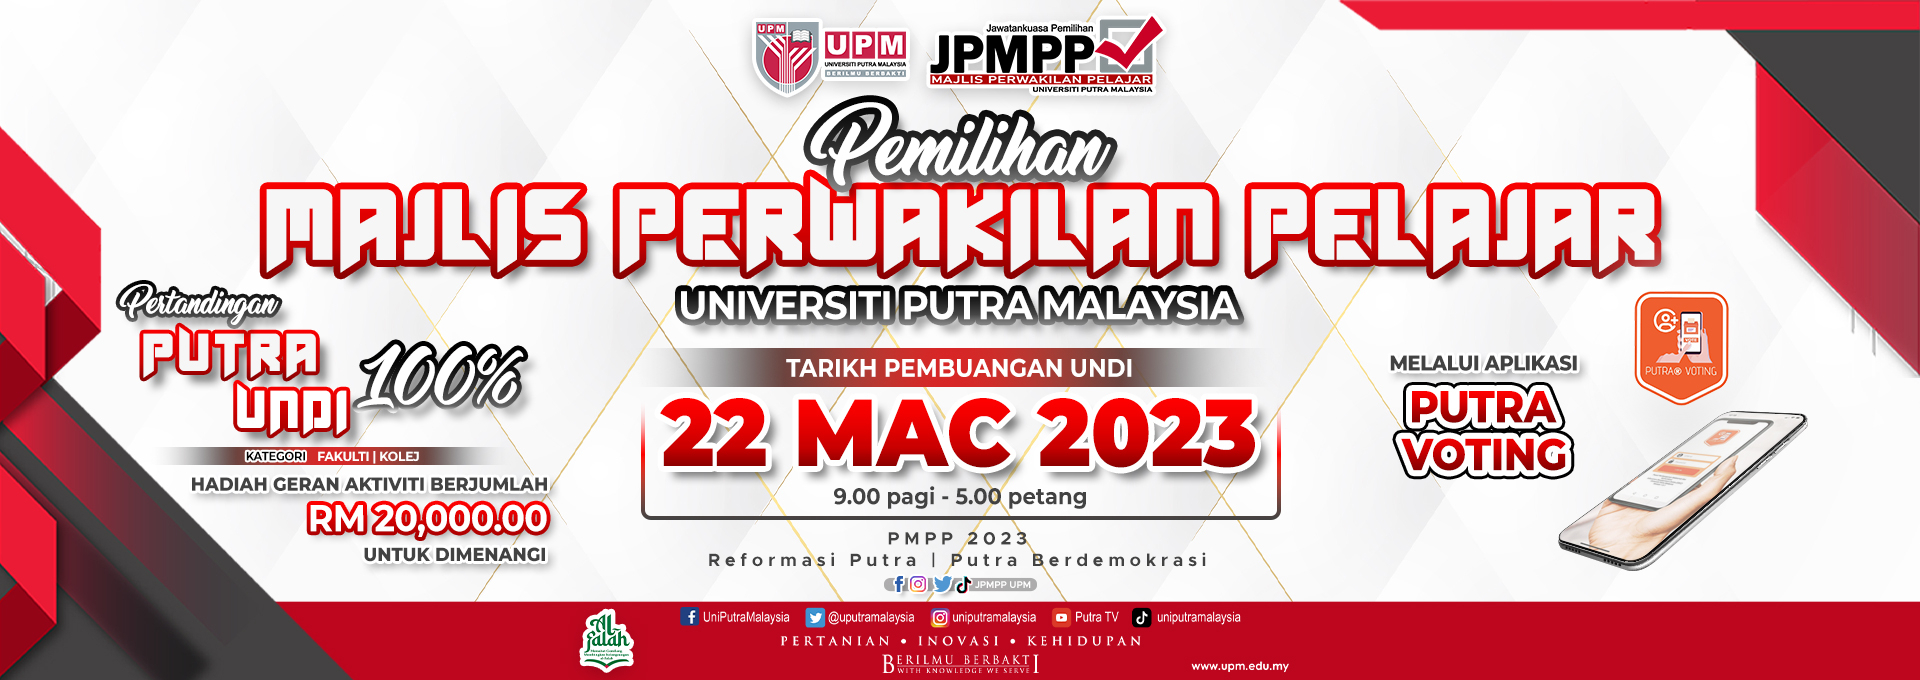 Election of the UPM Student Representative Council